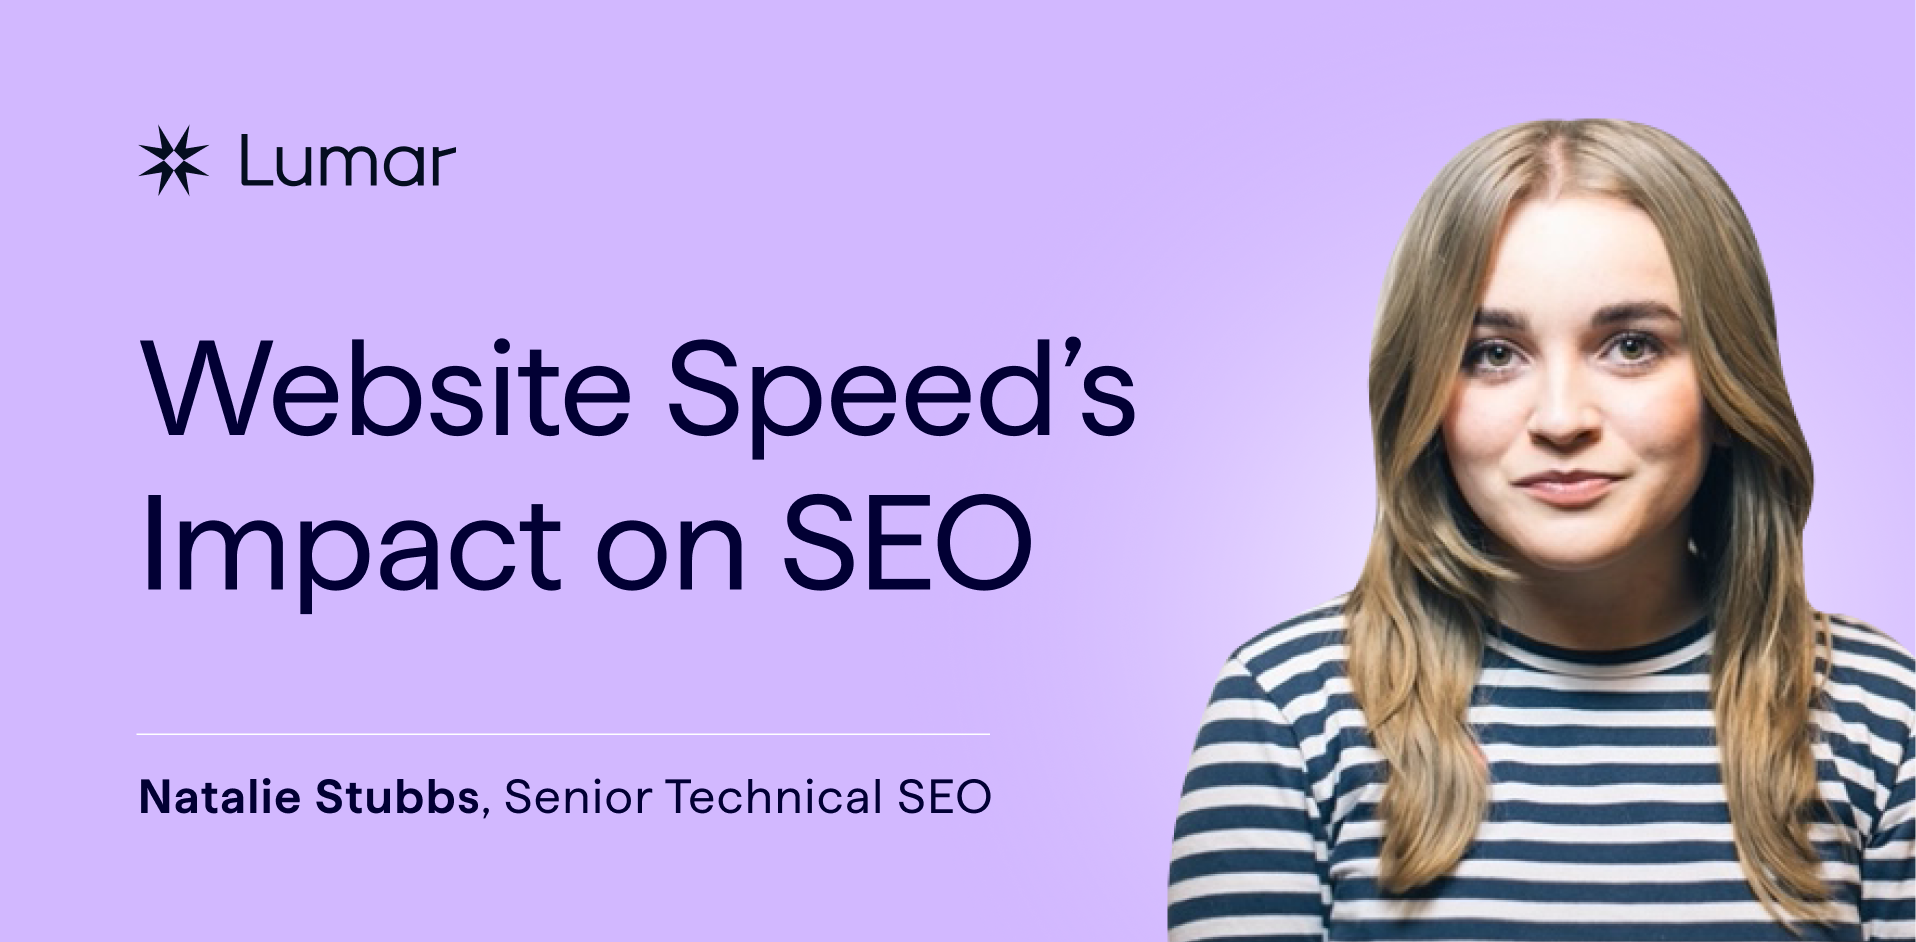 Why Site Speed Matters for SEO